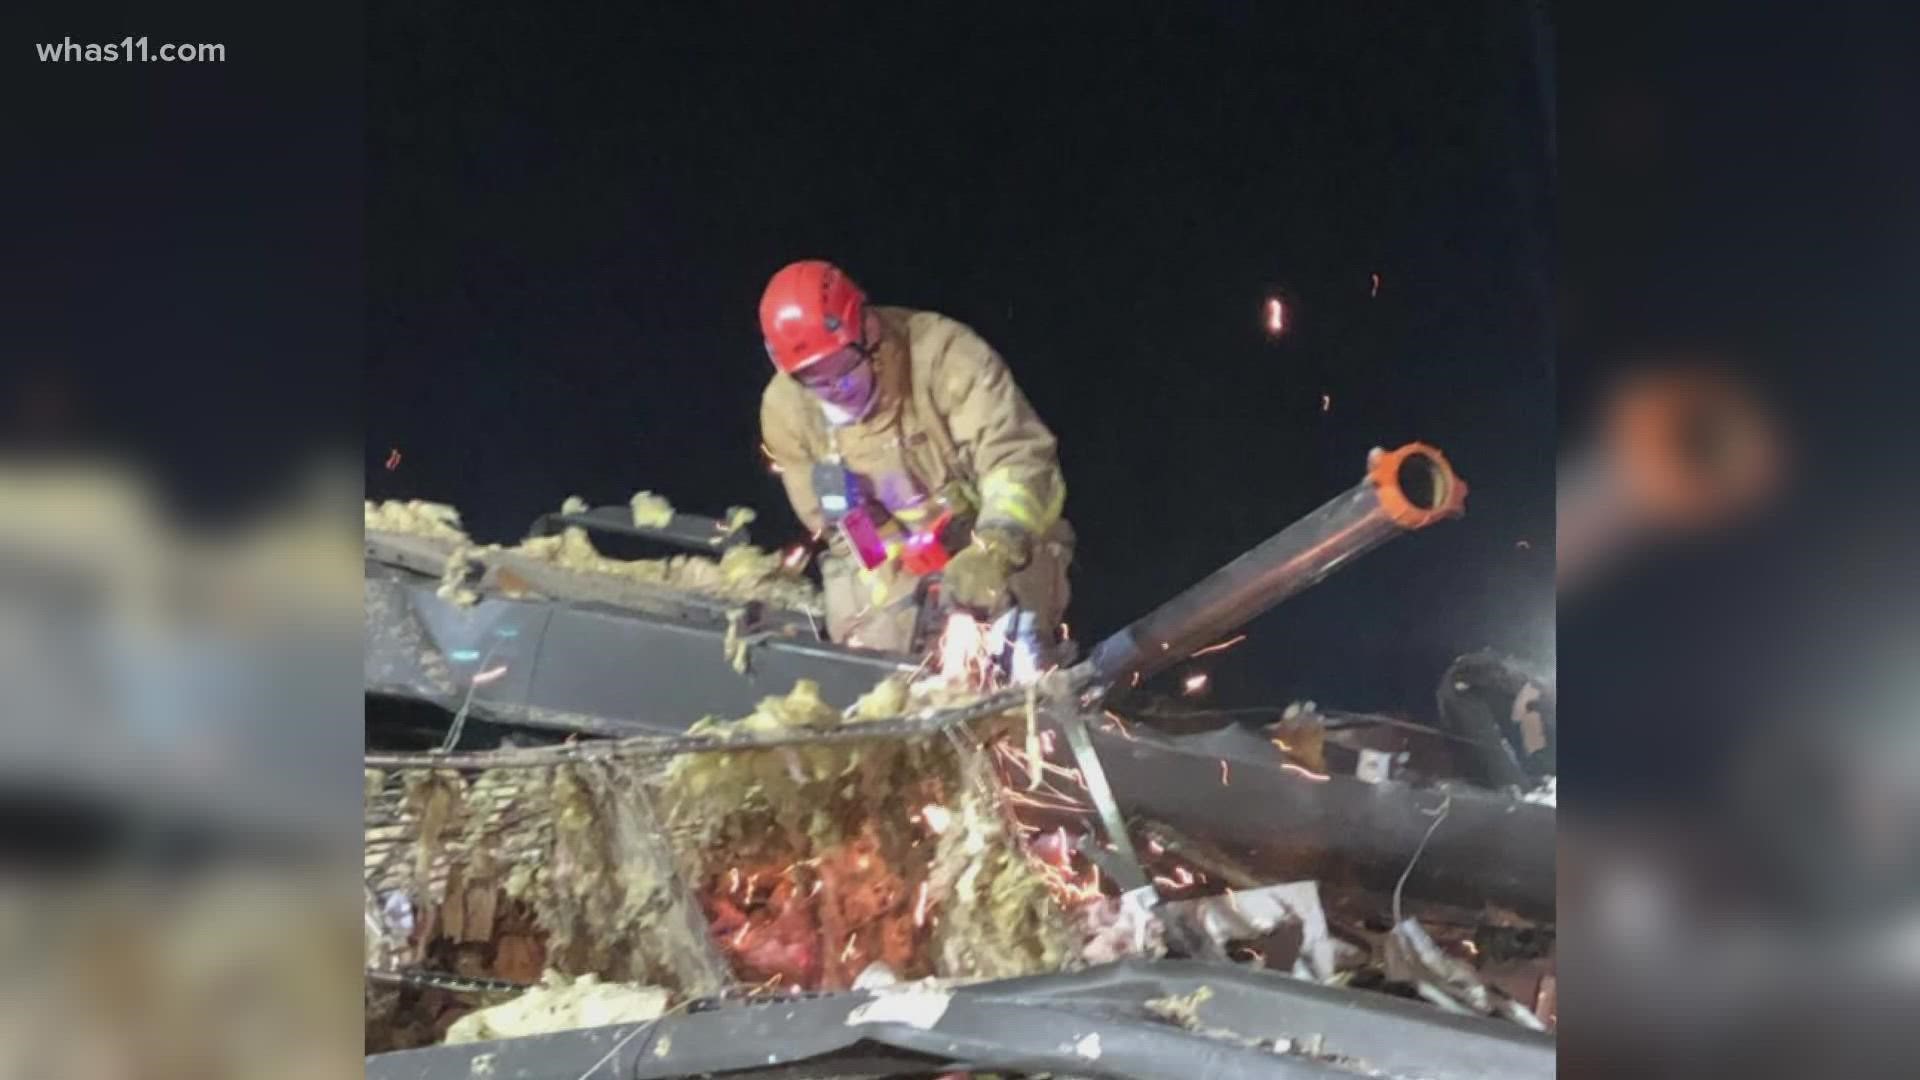 Fire crews answered the call as areas ravaged by tornadoes needed all of the help they could get following the devastation left behind from tornadoes Friday night.